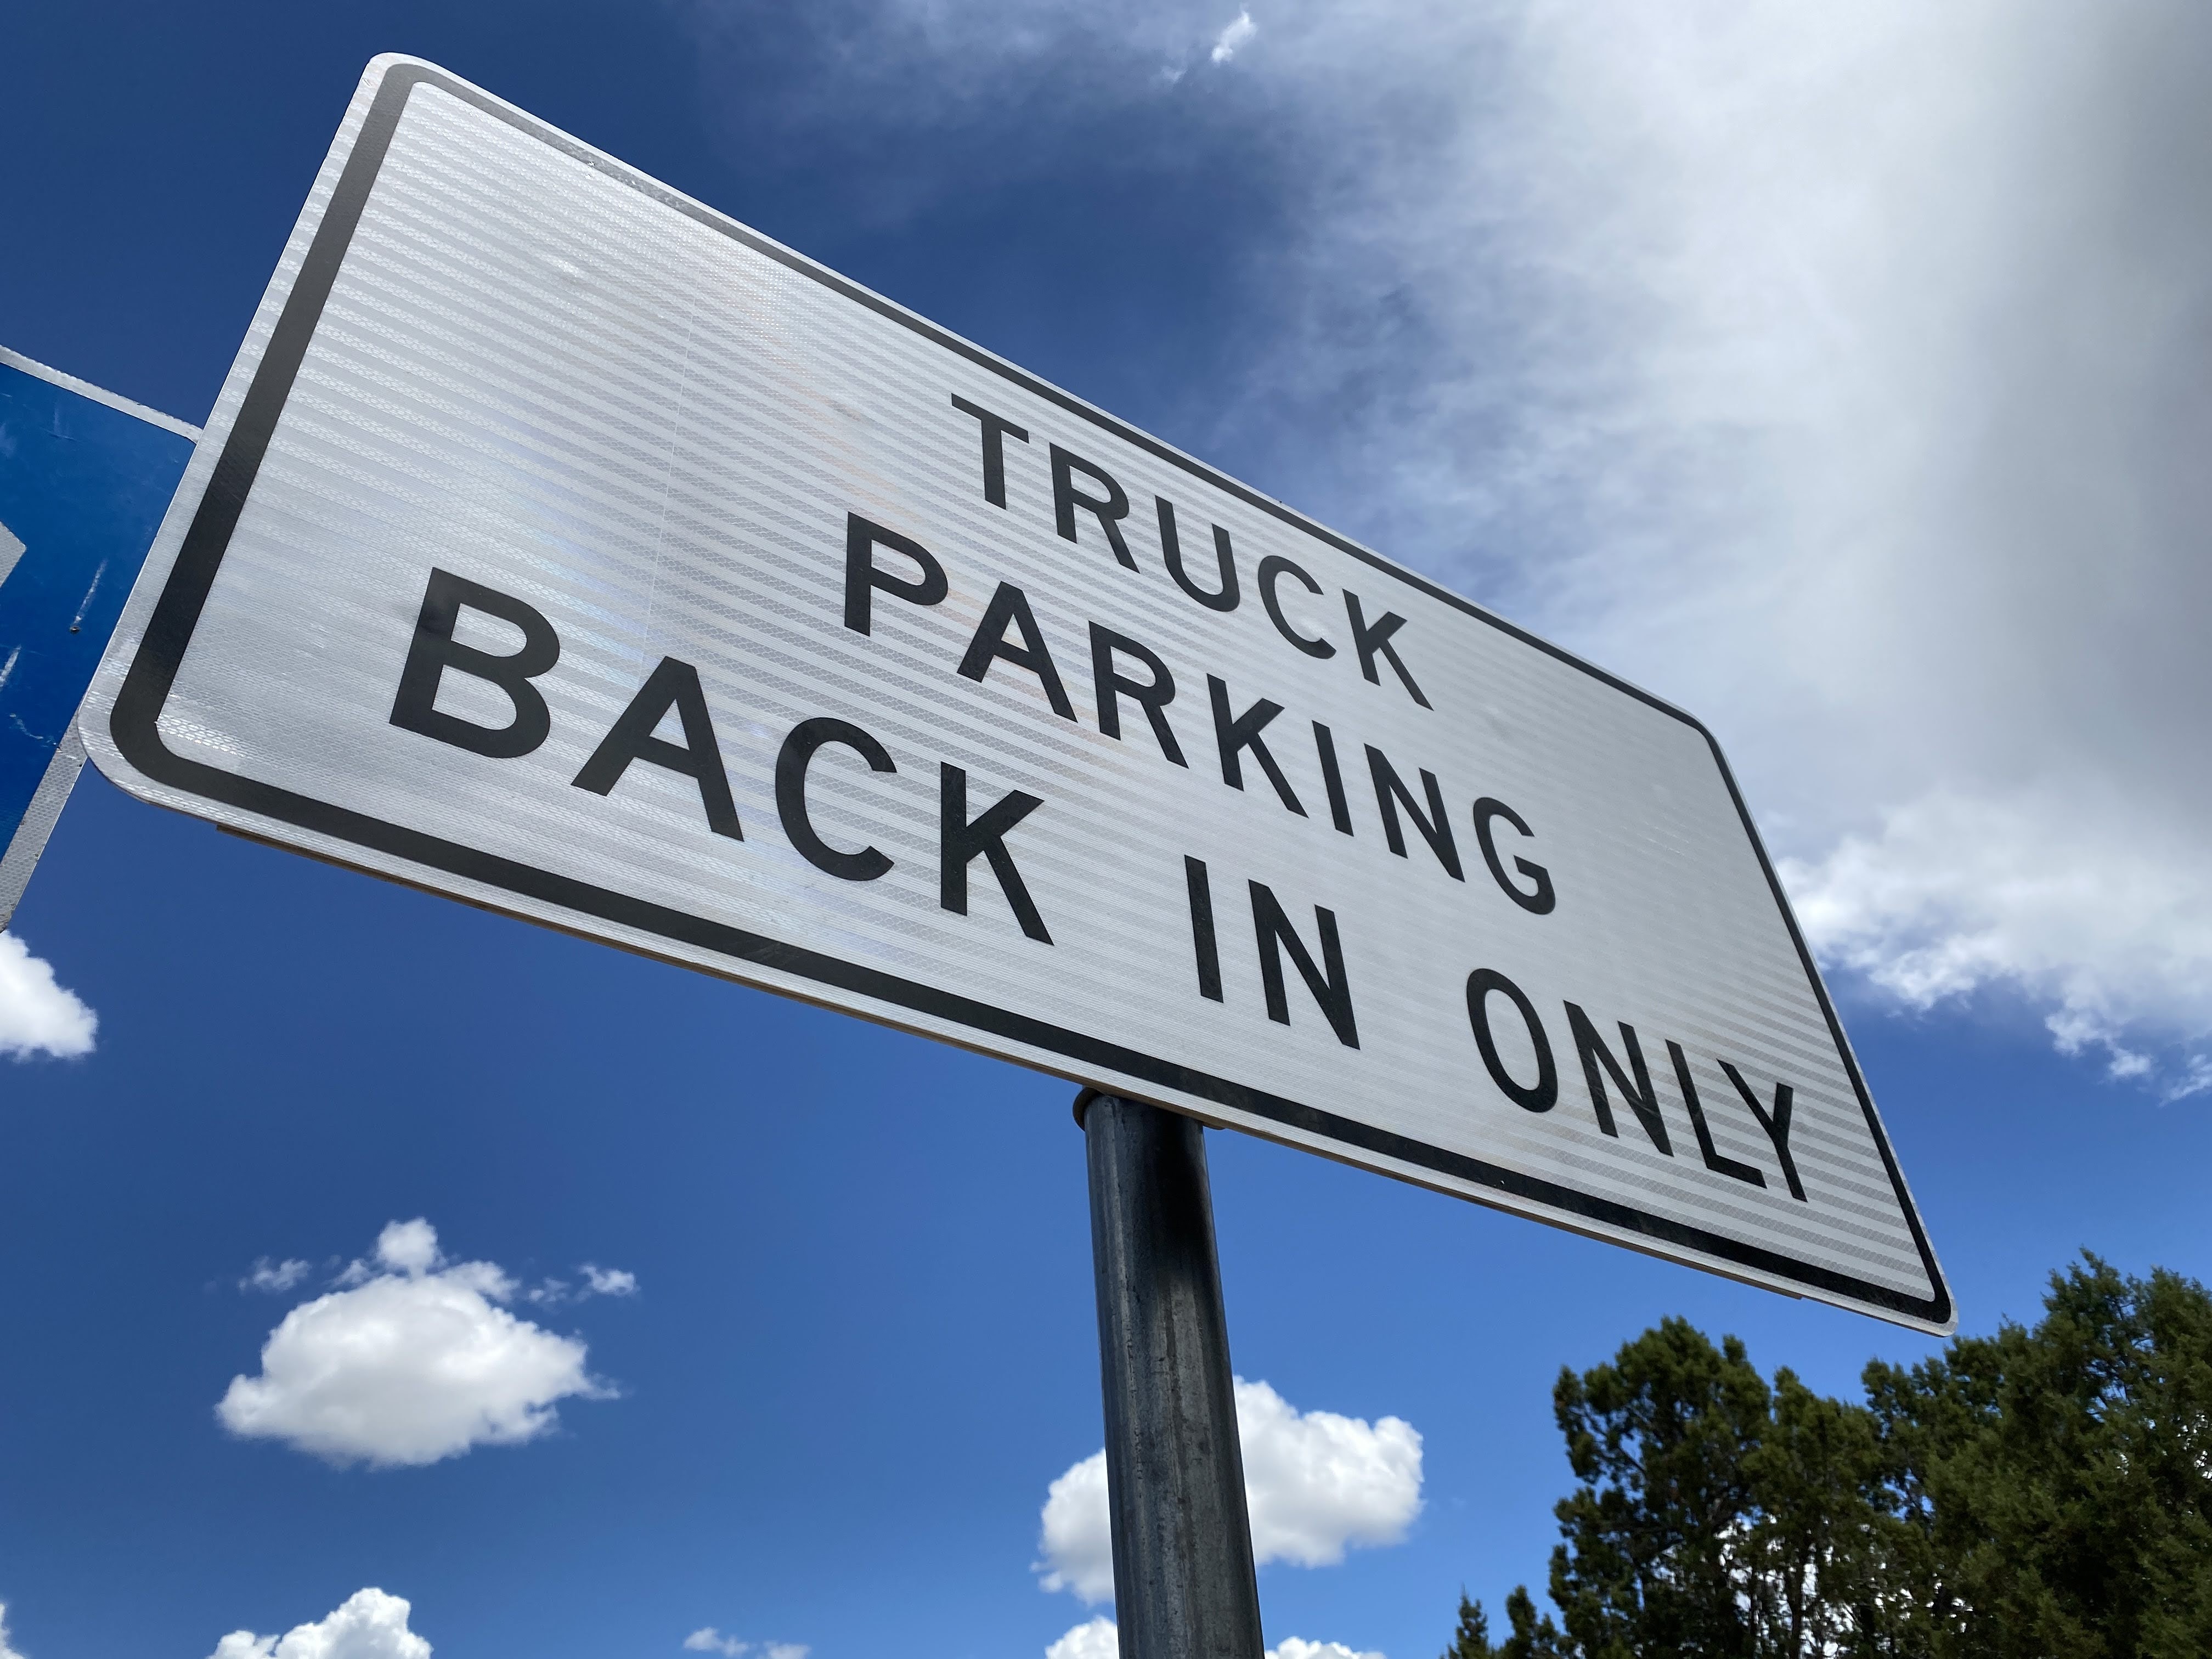 Truck parking back in only sign detail image